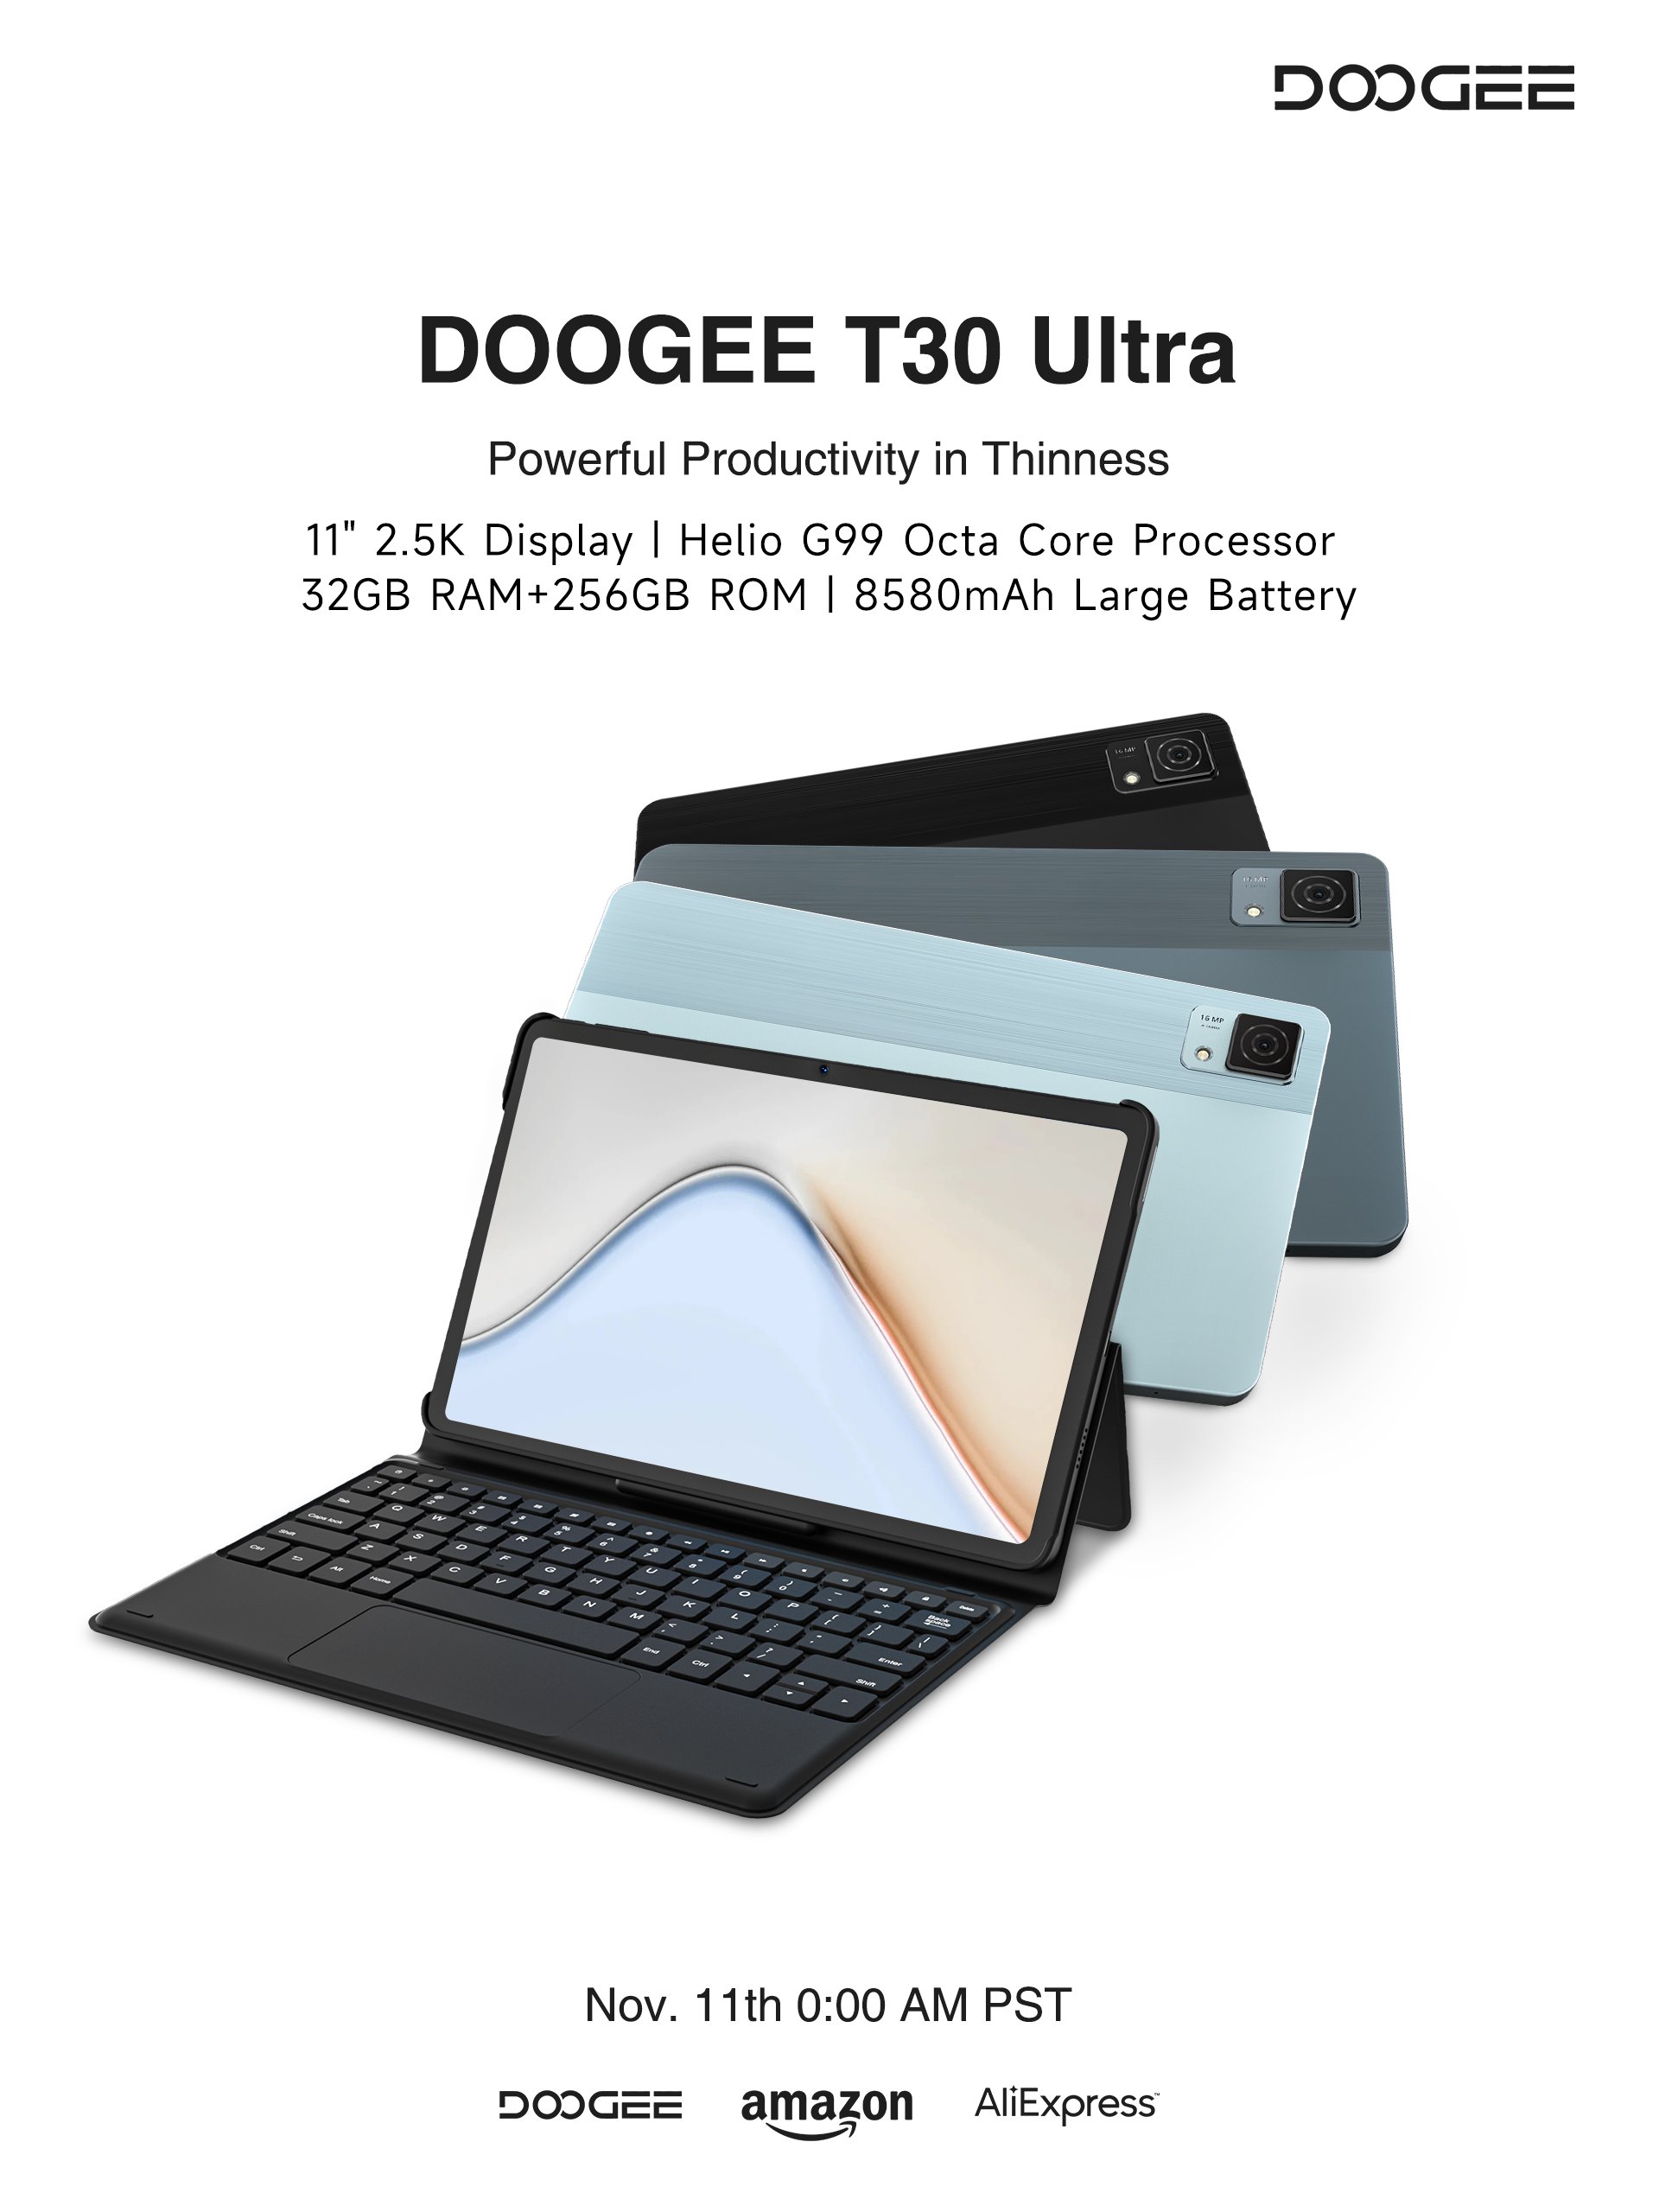 DOOGEE on X: Large Screen, High Speed and Sleek Design. You got